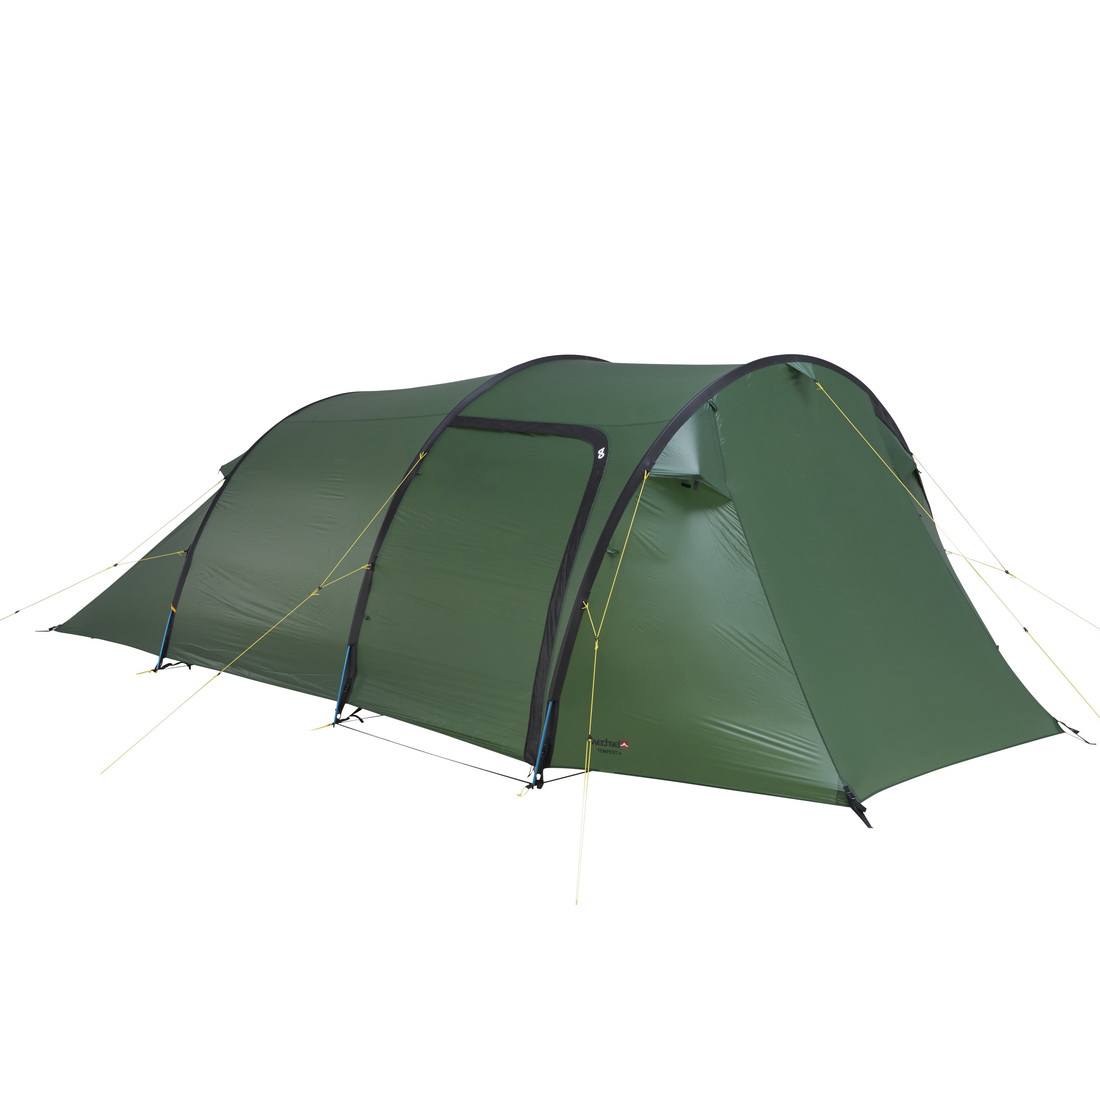 Image of Wechsel Tempest 4 Tent - Green